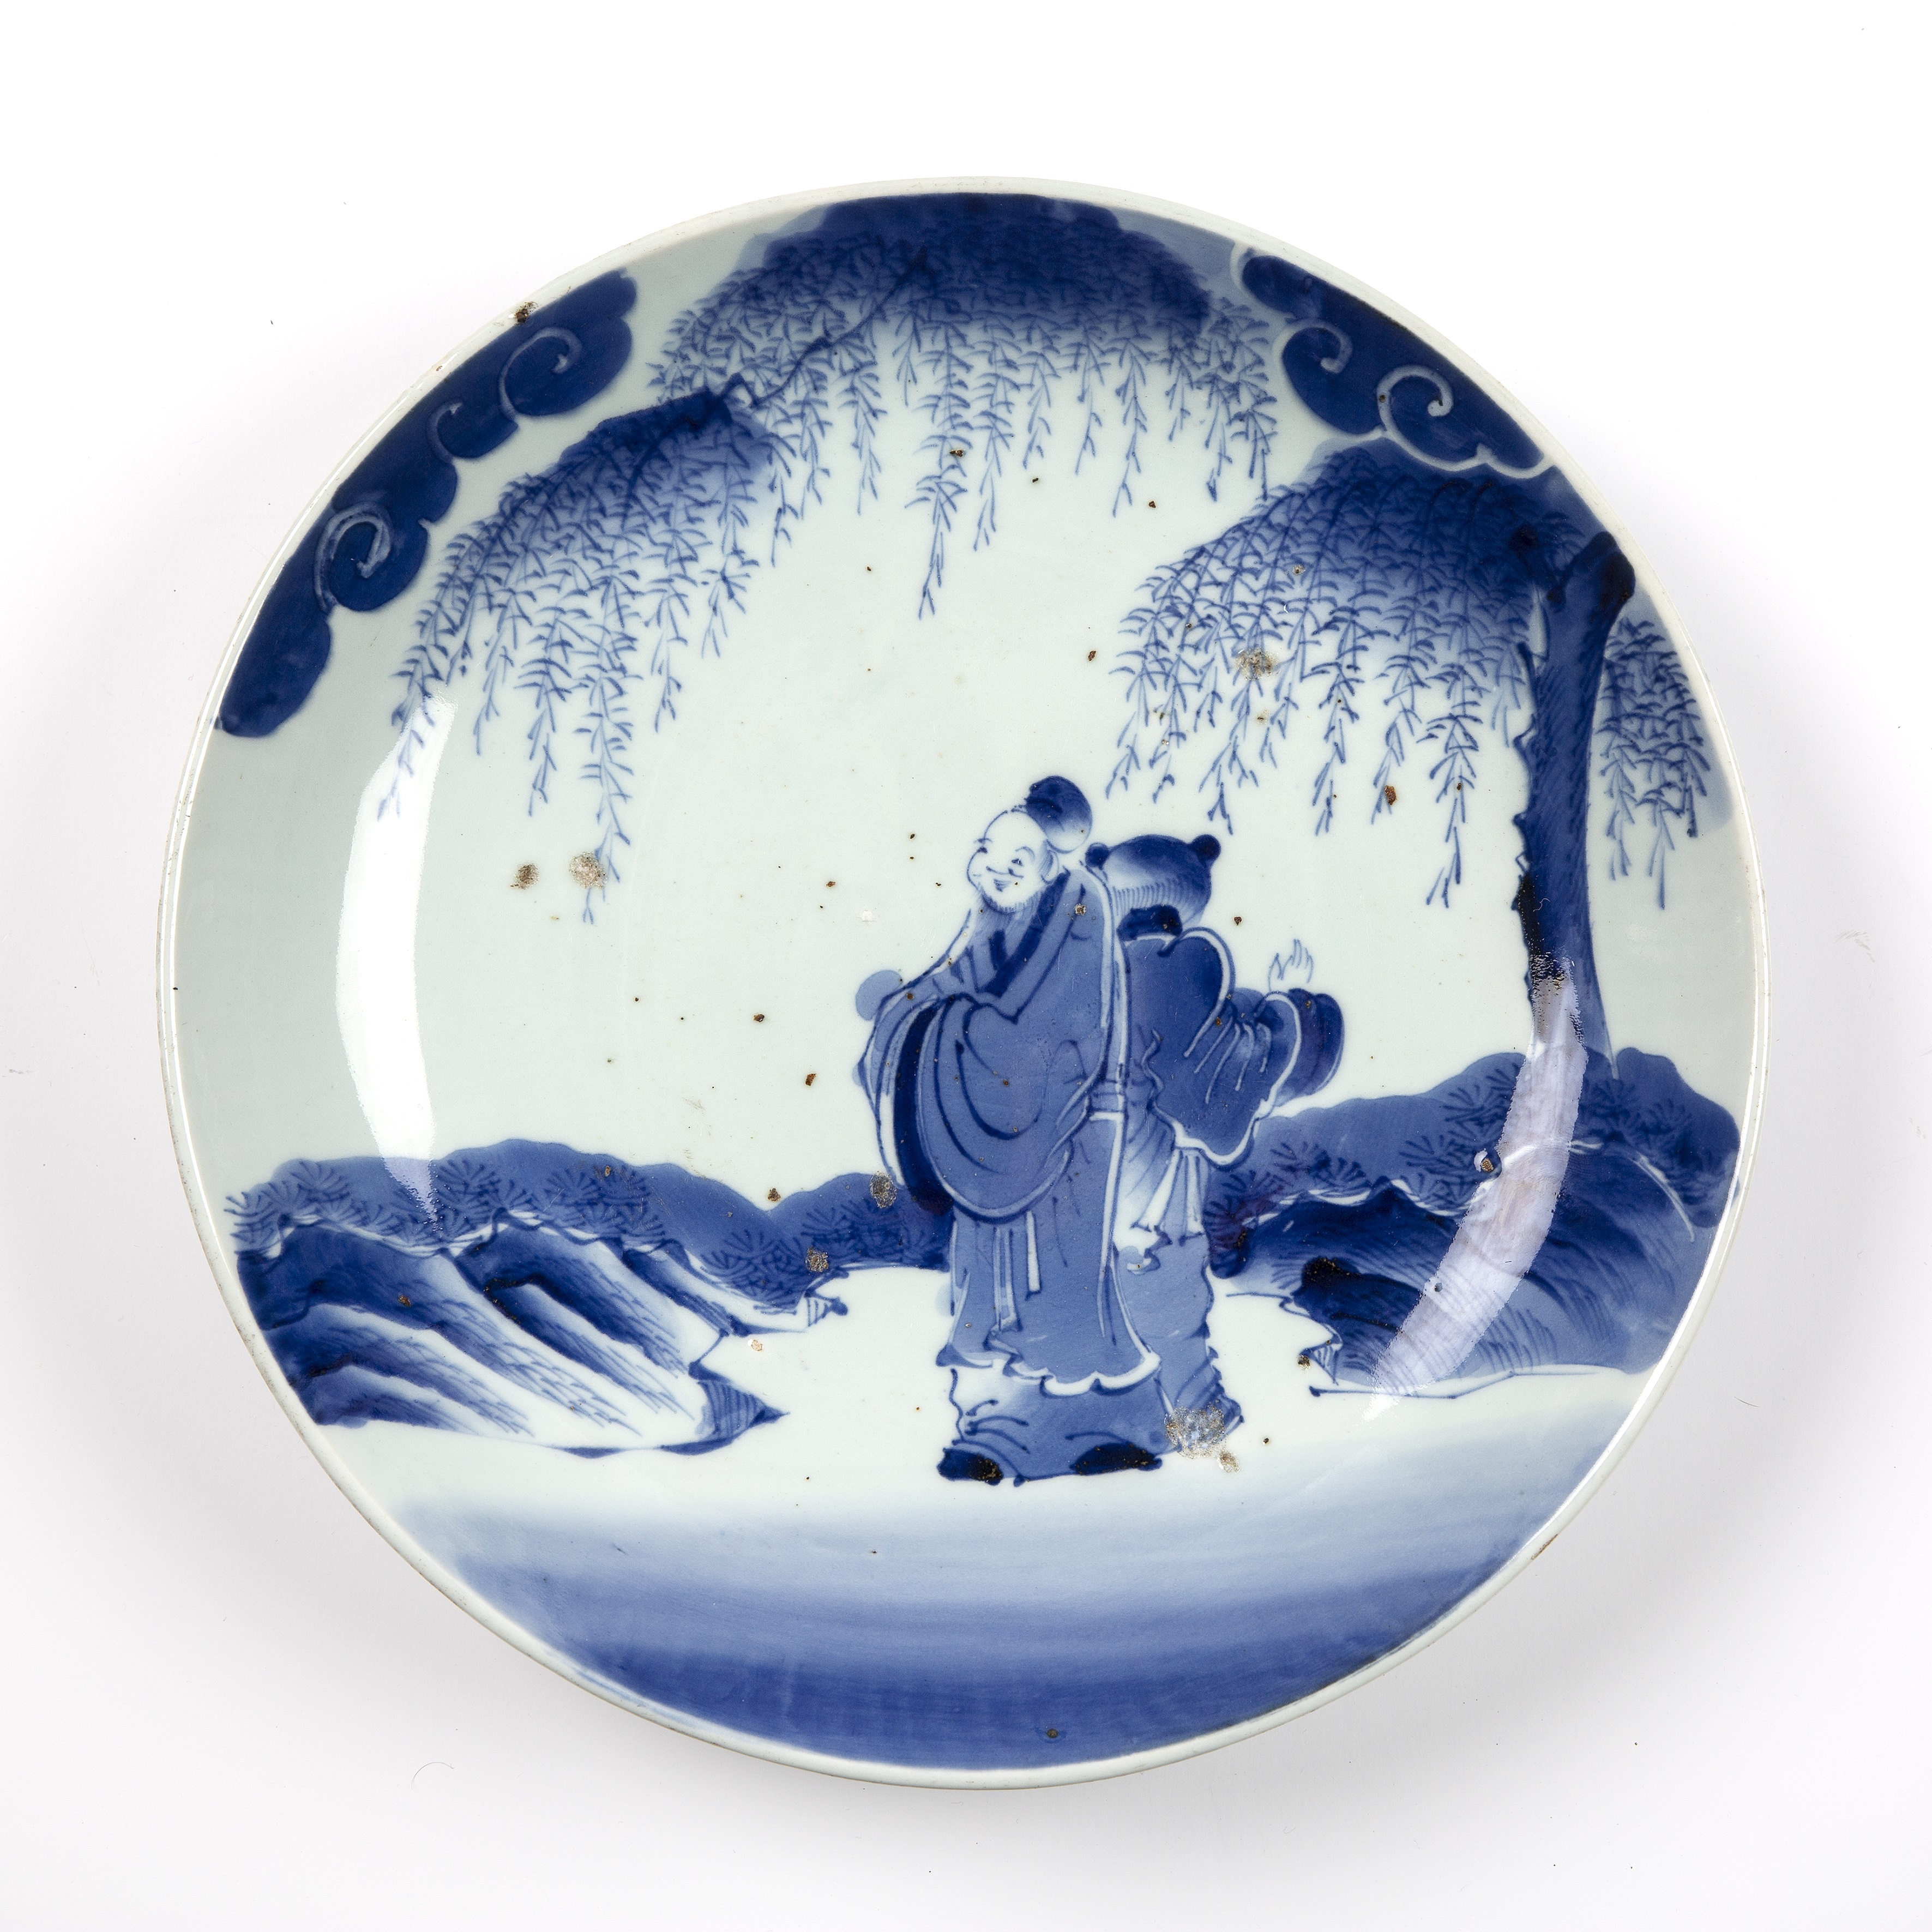 Blue and white porcelain Arita large dish Japanese, 18th Century painted with two scholars under a